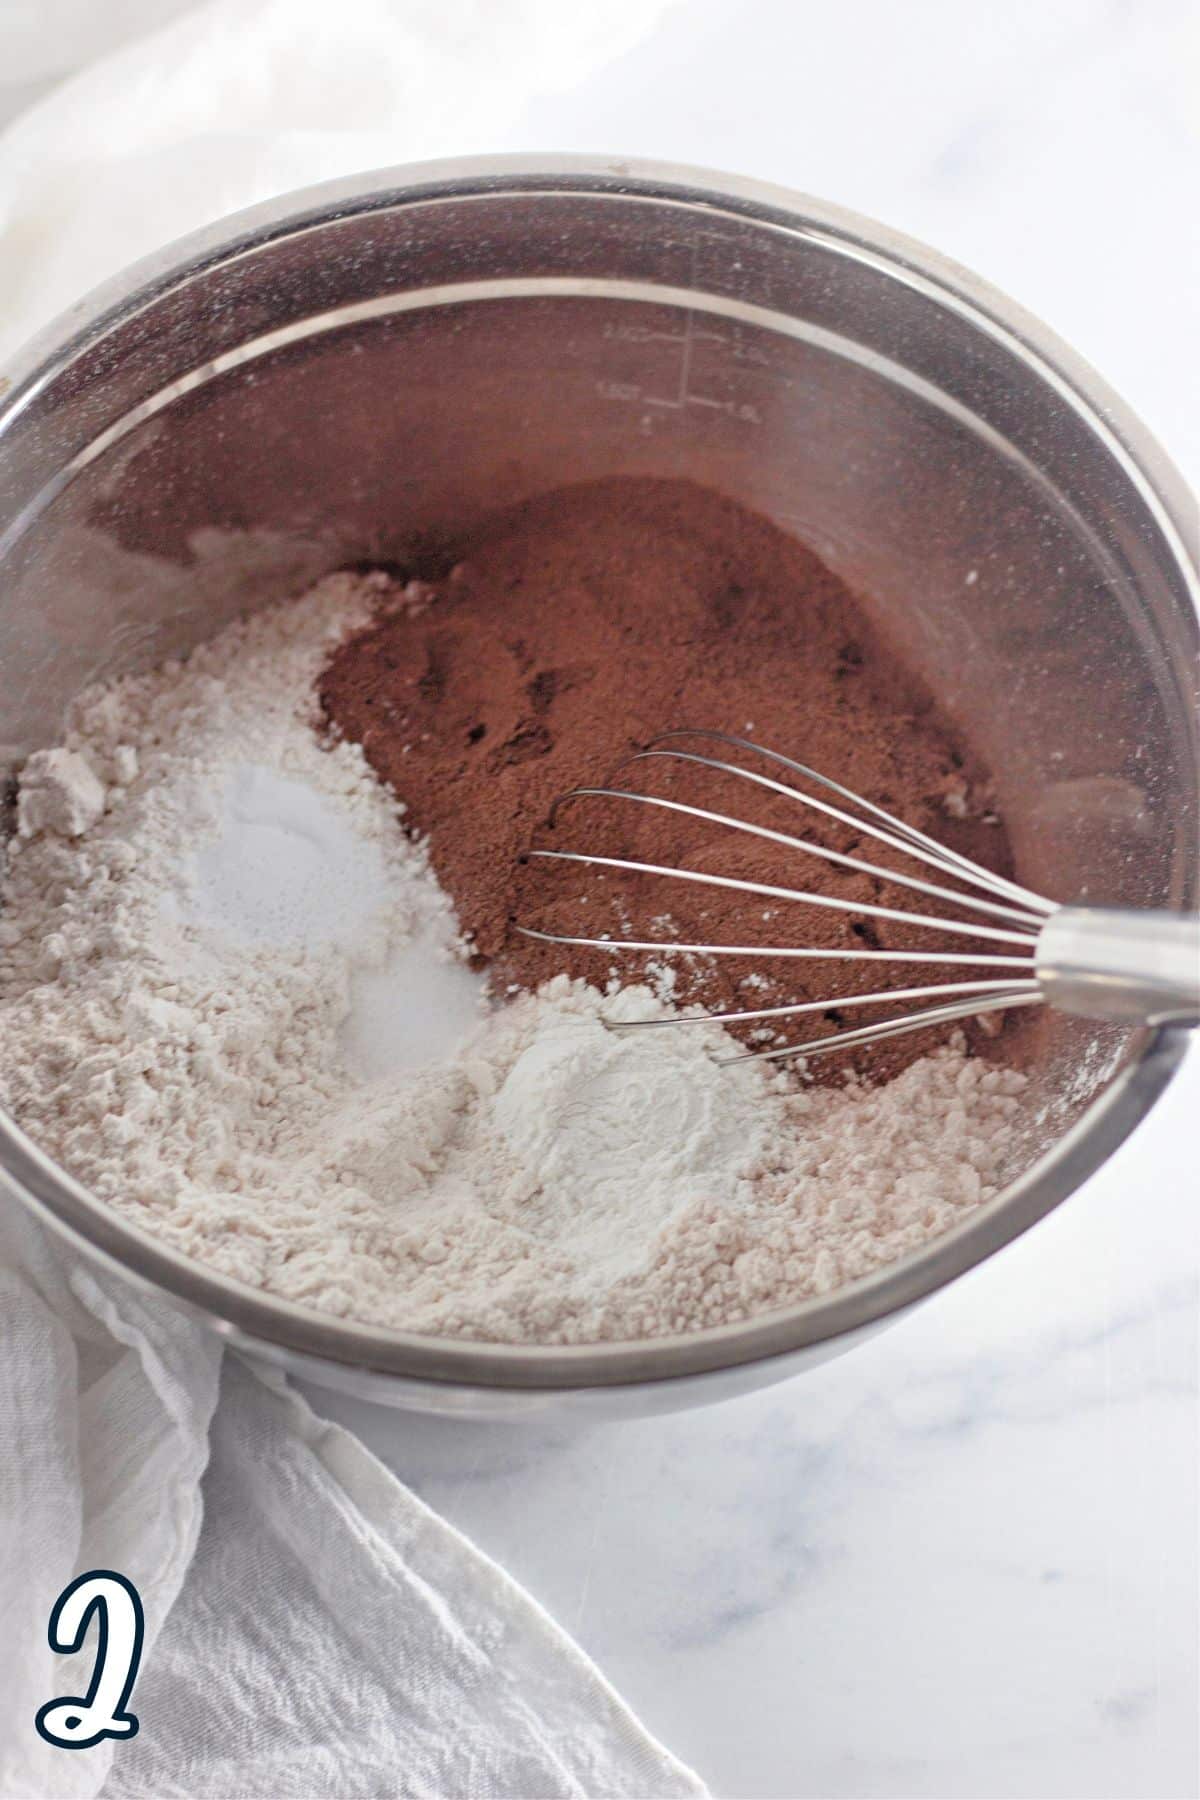 A metal bowl filled with flour, cocoa powder, other ingredients, and a whisk.